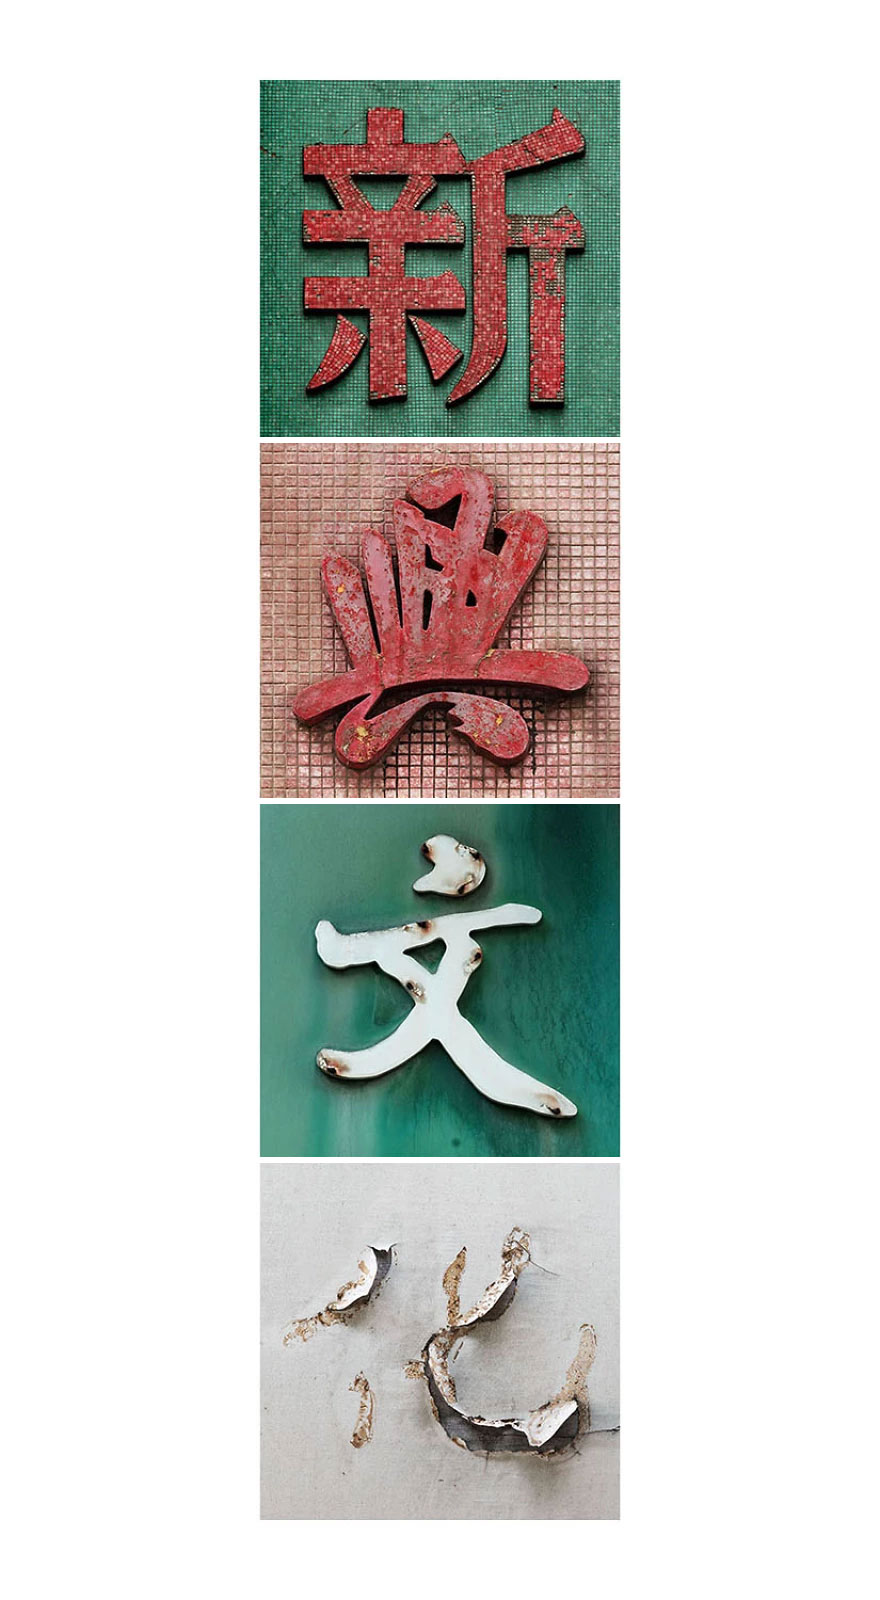 I Took 1,000 Photos Of Hong Kong’s Old Shop Signs And I Have Been Learning Chinese To Create This Visual Poetry